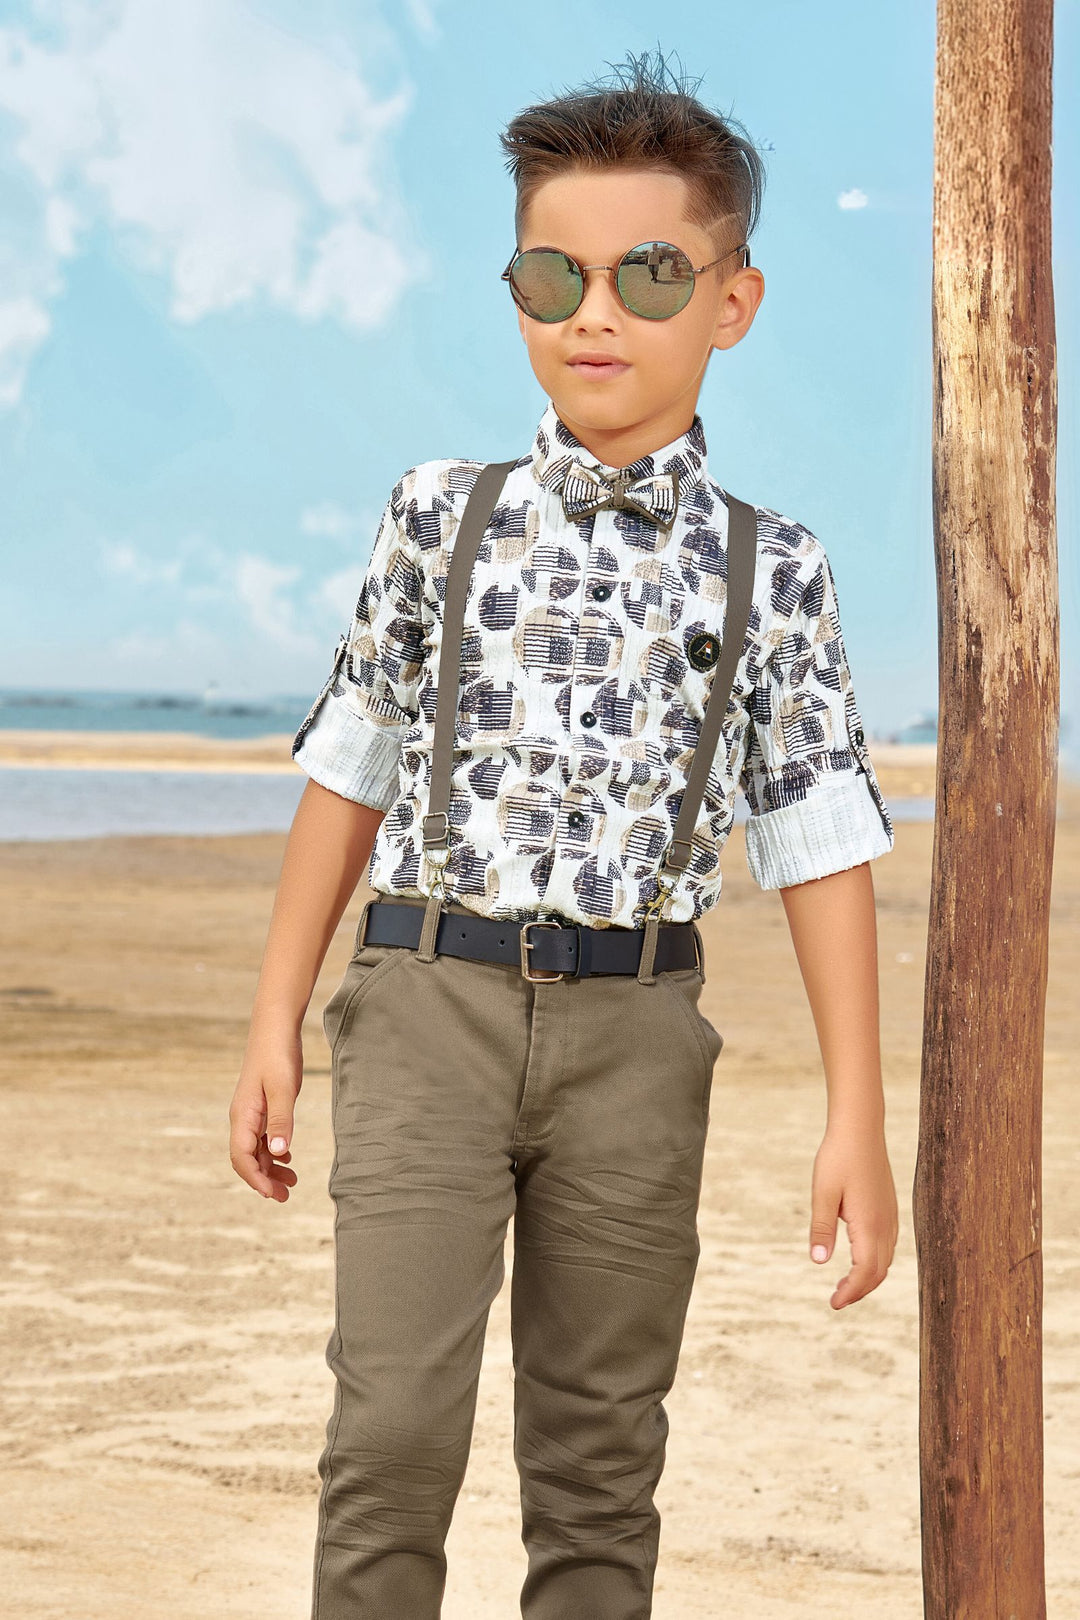 Cream Printed with Beige Suspender Style Pant Shirt Set for Boys with Bow and Belt